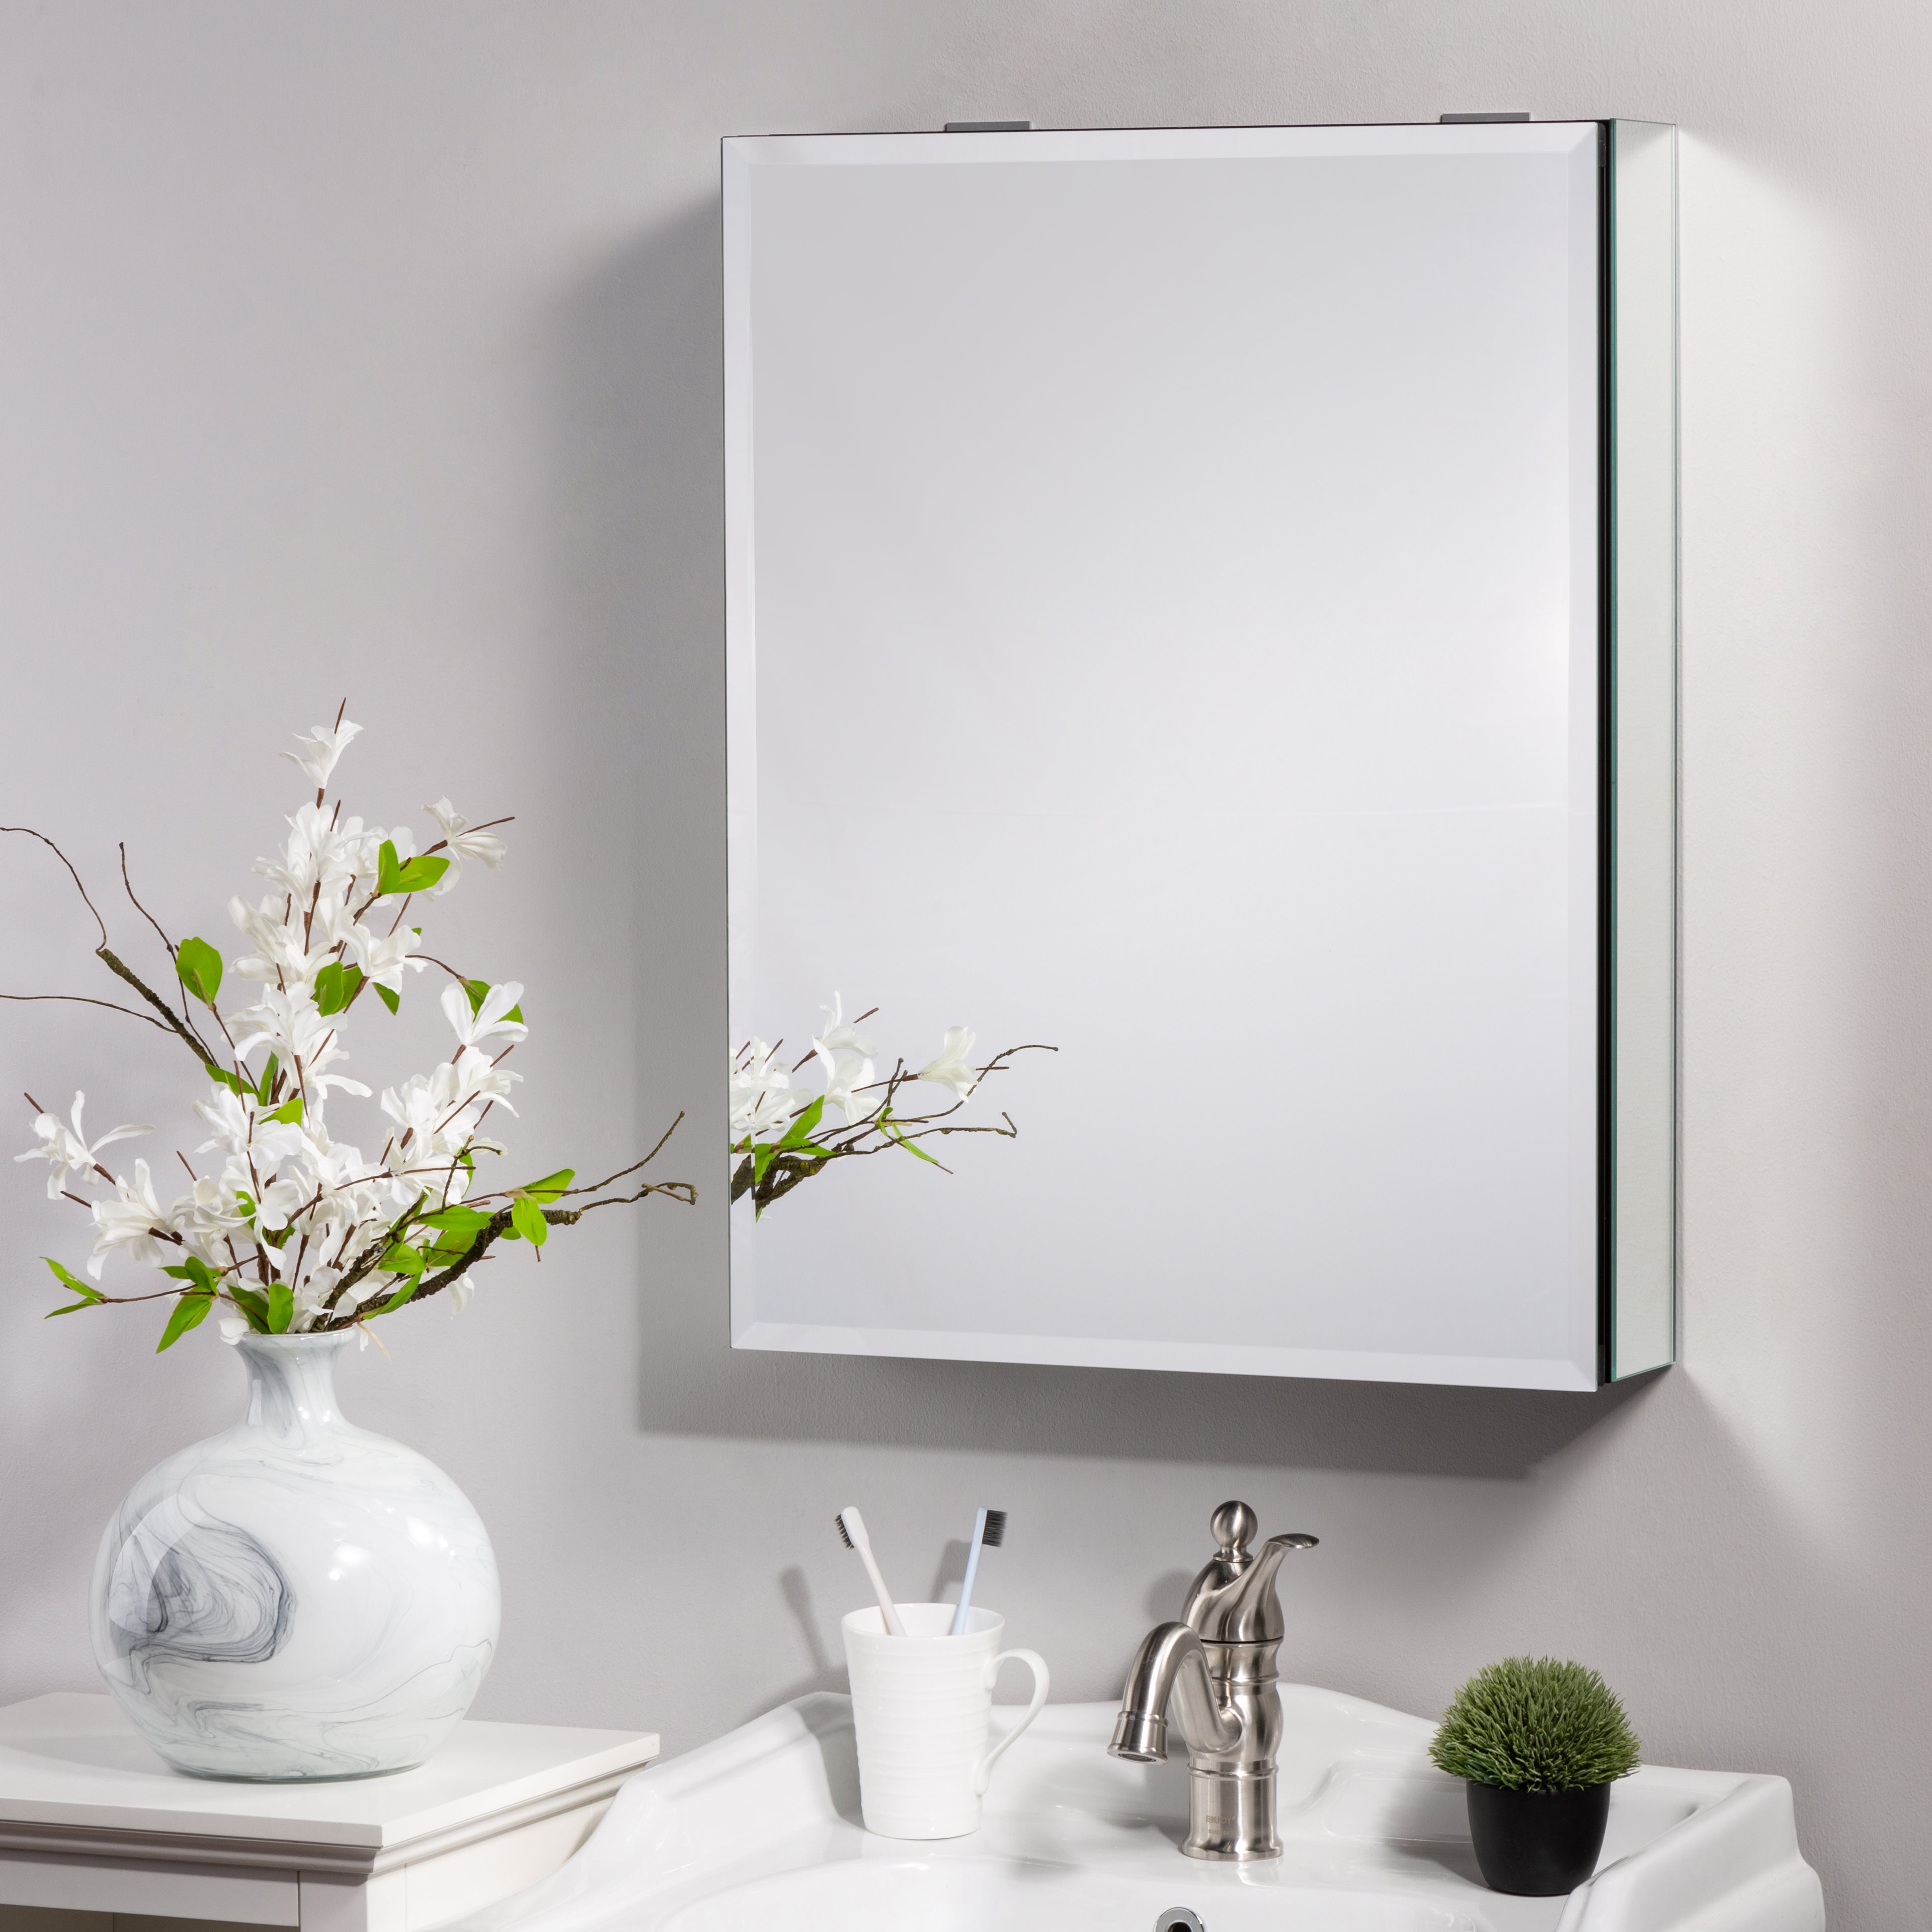 20x26 Inch Medicine Cabinet with Mirror - Featuring Soft-Close Hinge and Adjustable Shelves - Eco LED Lightings 